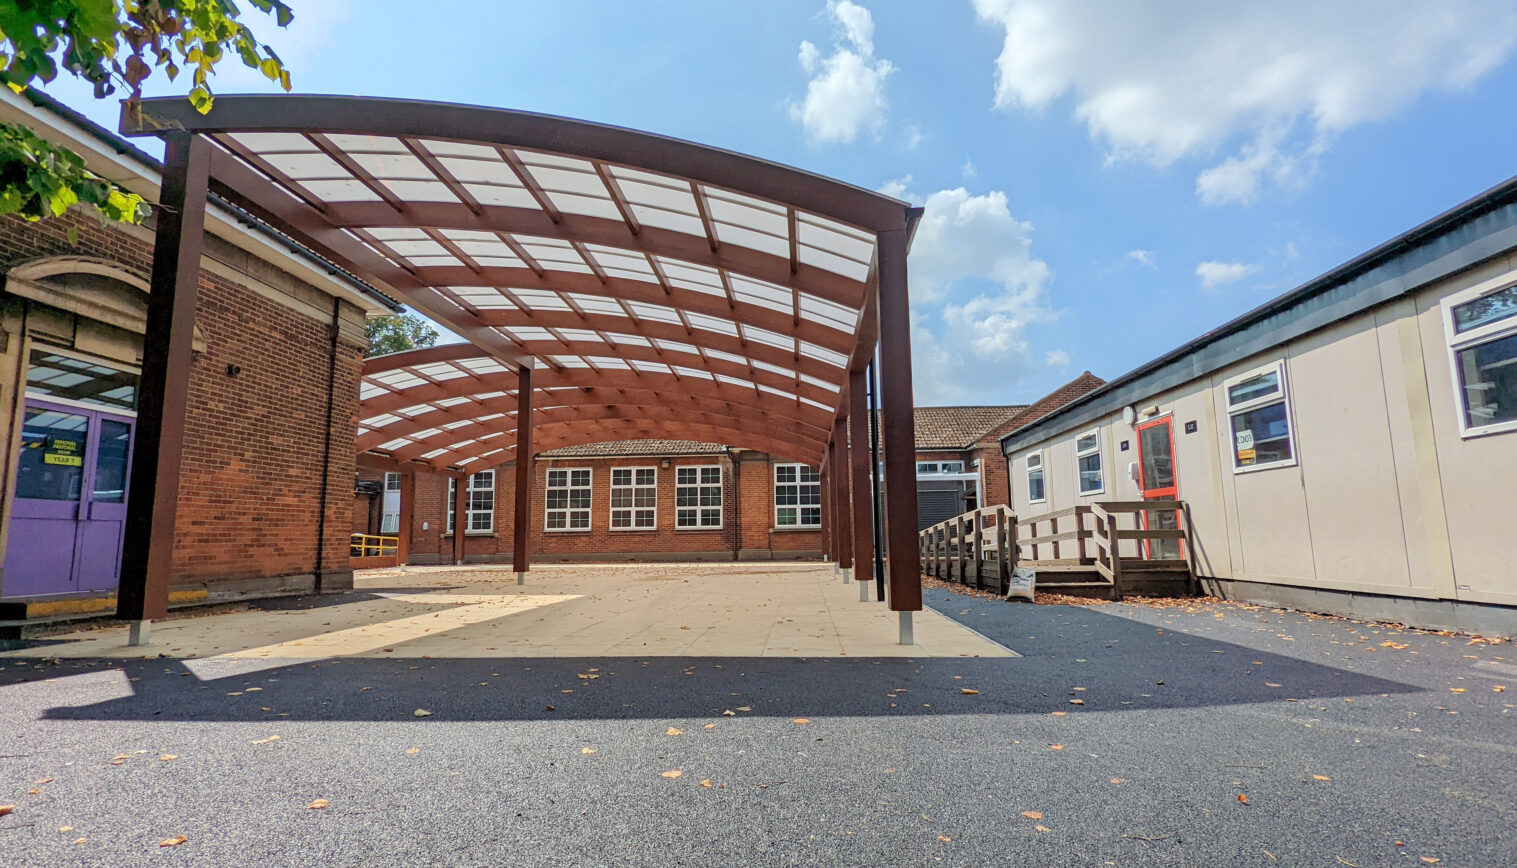 Designing for the Future: Meeting Educational Needs through Thoughtful Canopy Integration